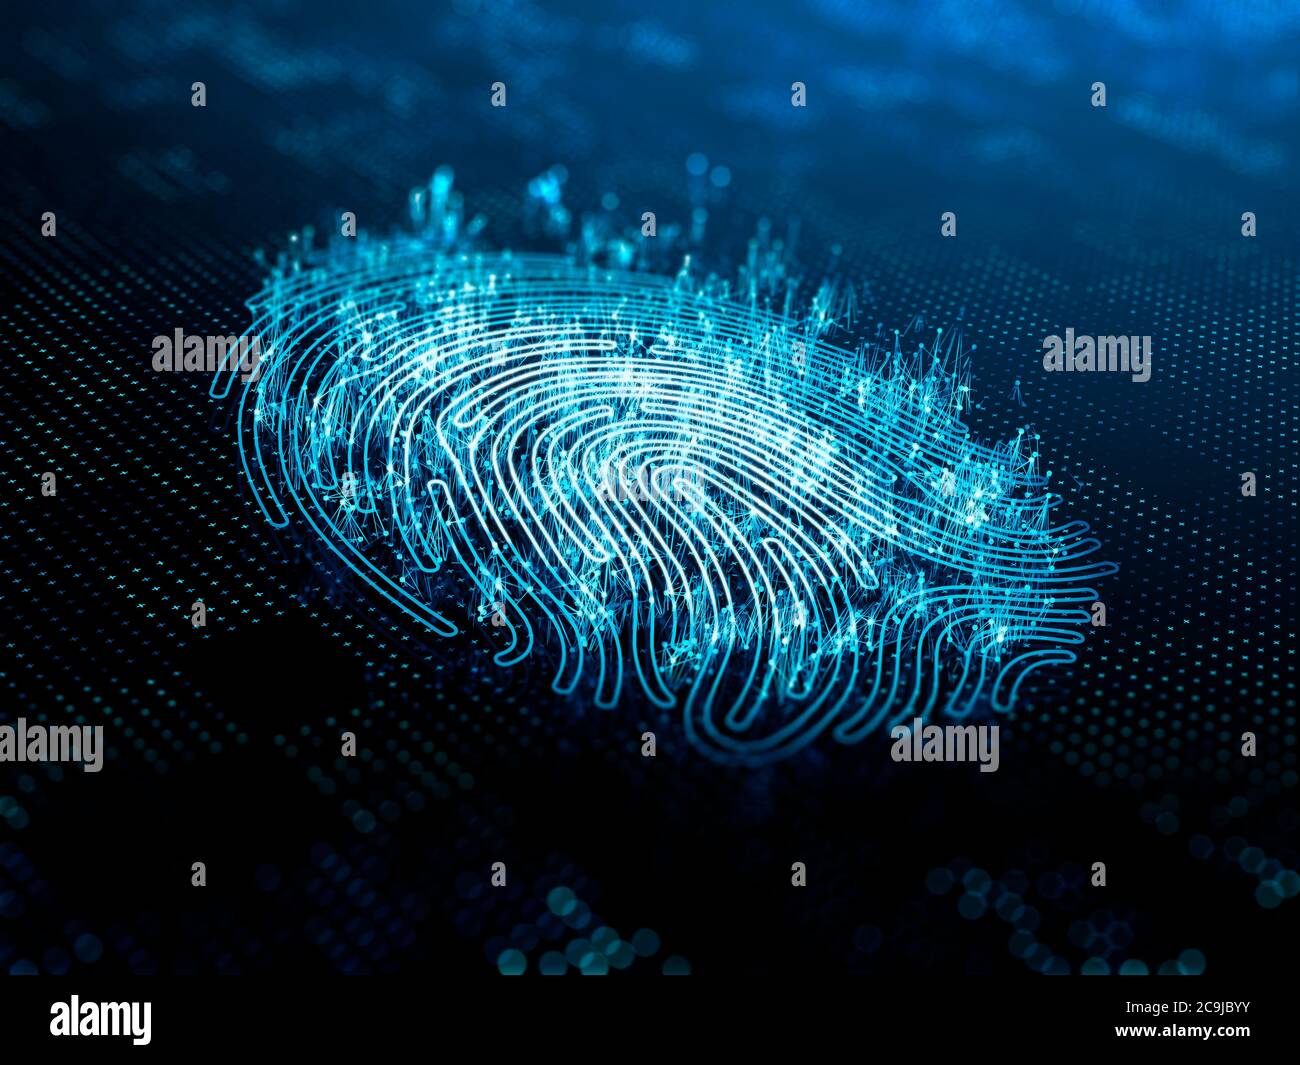 A computer identify and measuring the fingerprint on the digital surface. Stock Photo